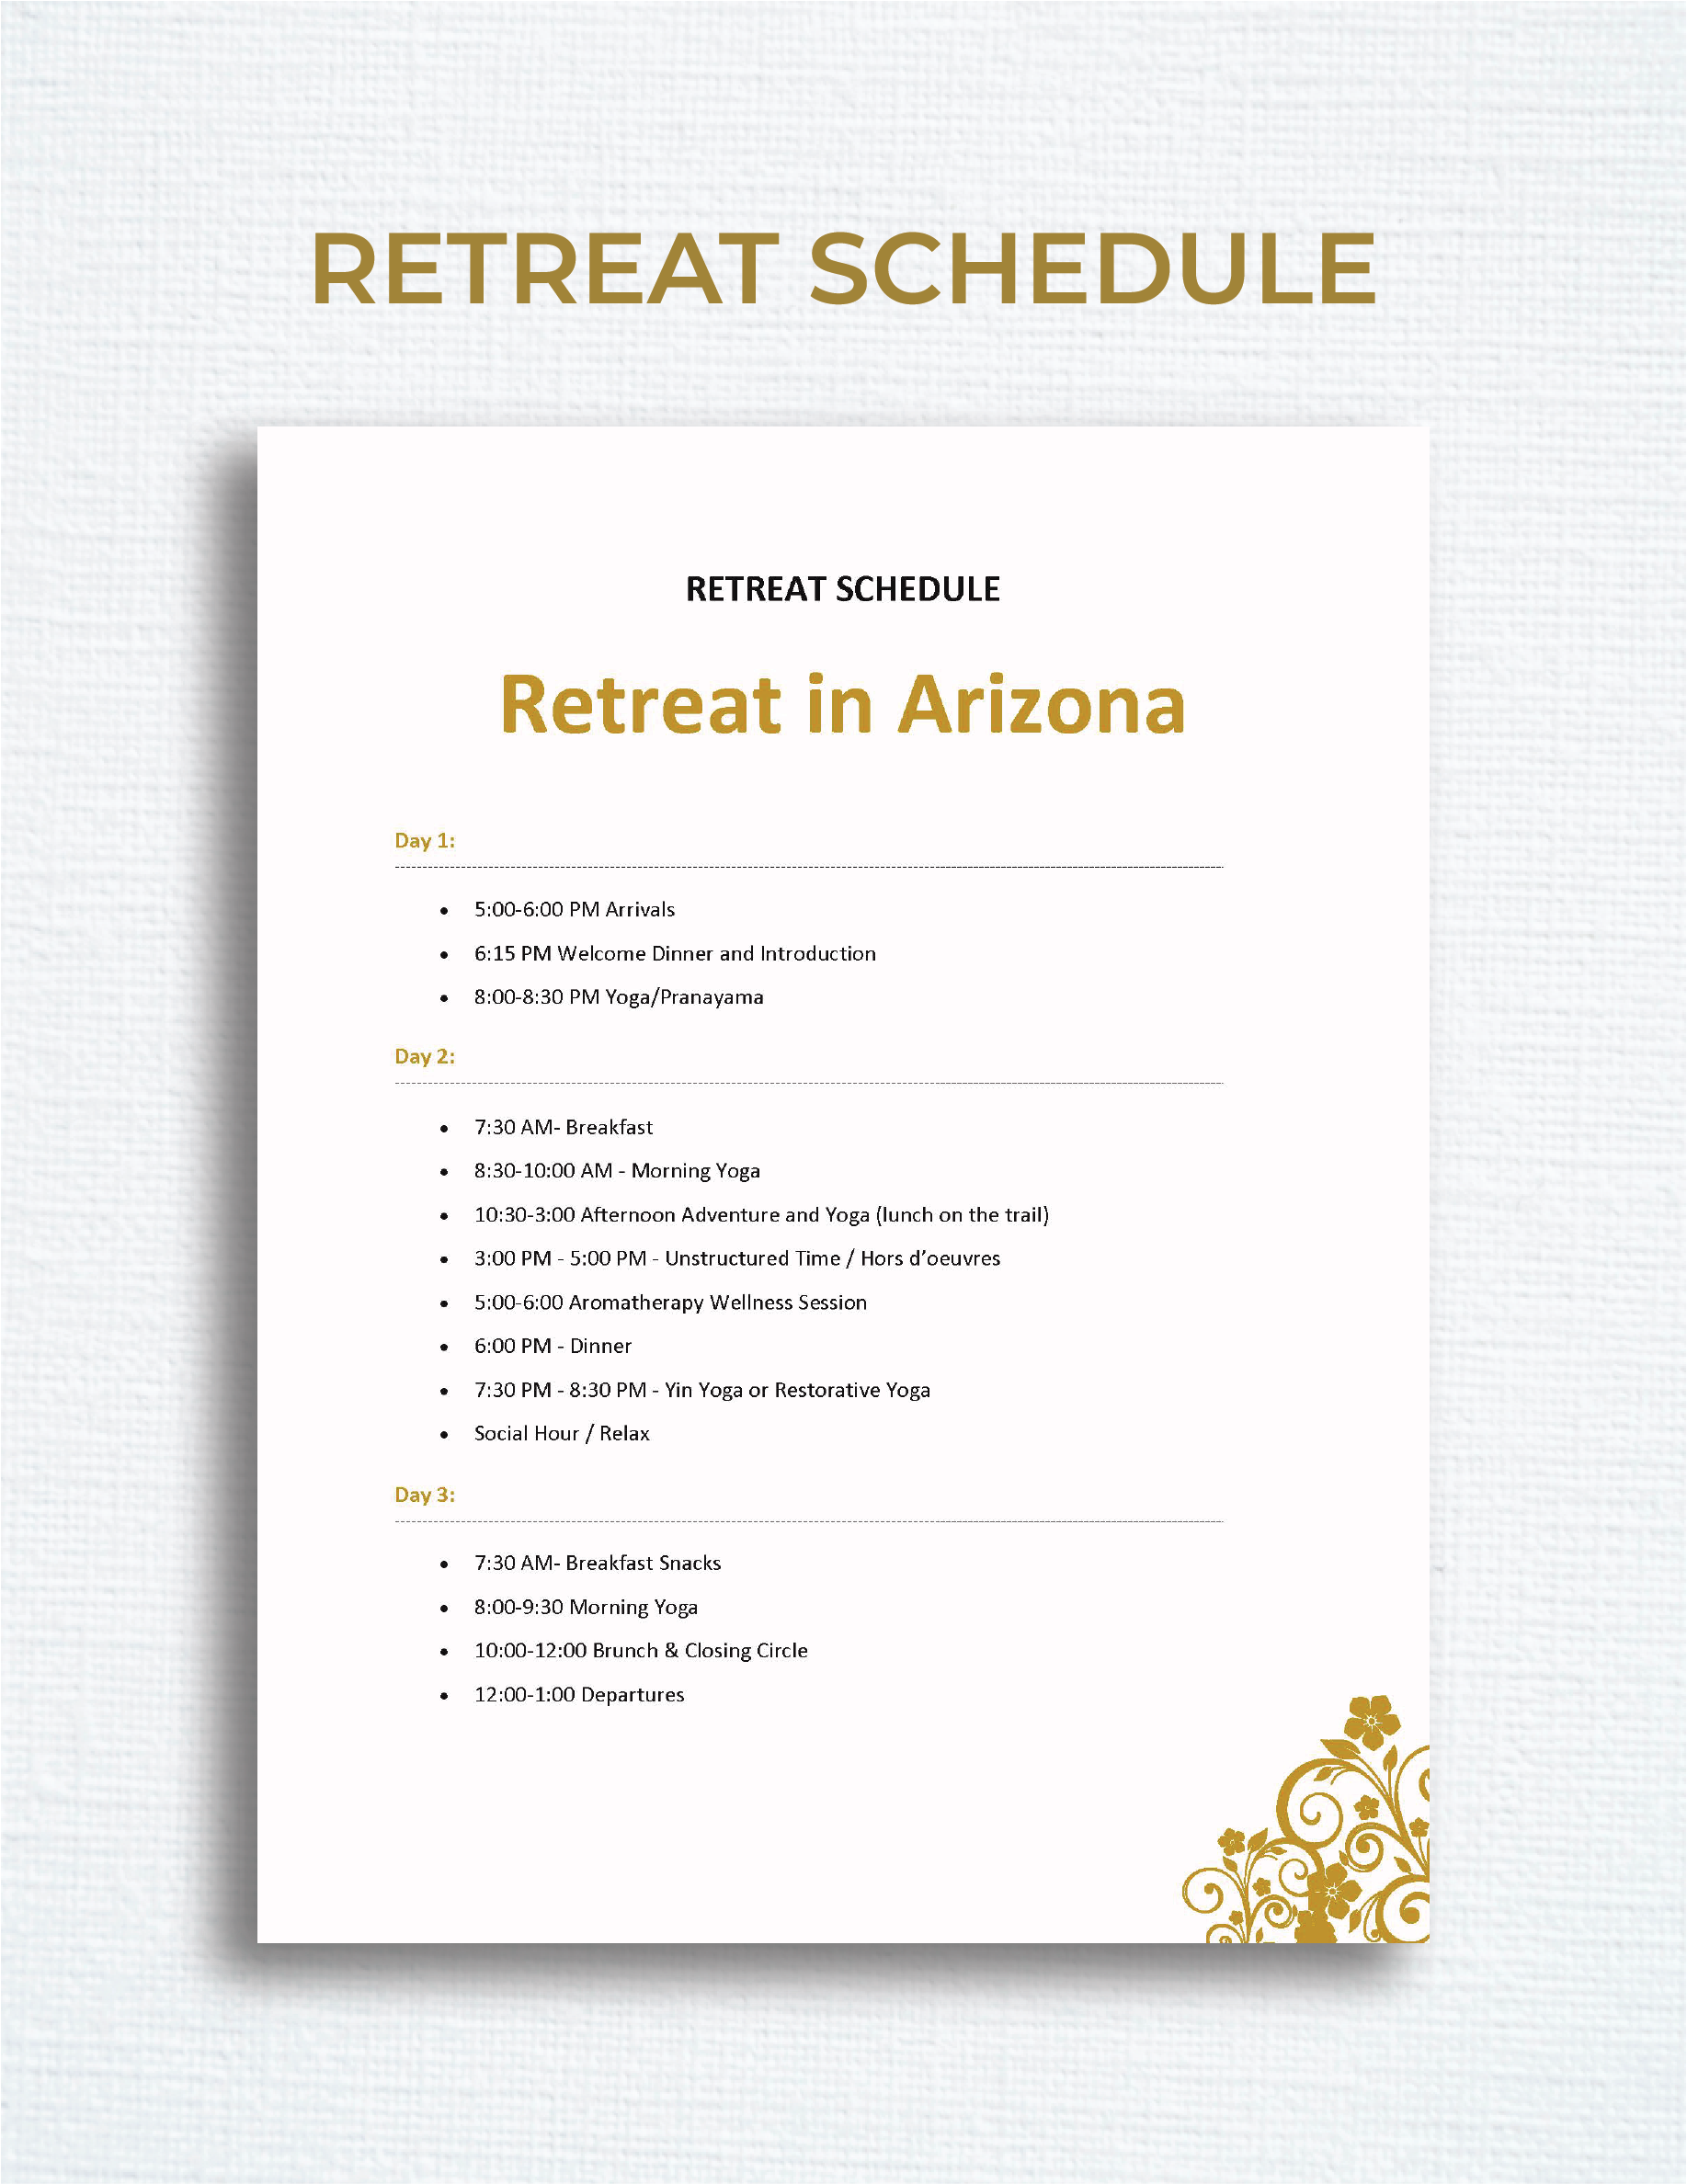 Retreat Schedule Template Download in Word, Google Docs, Apple Pages